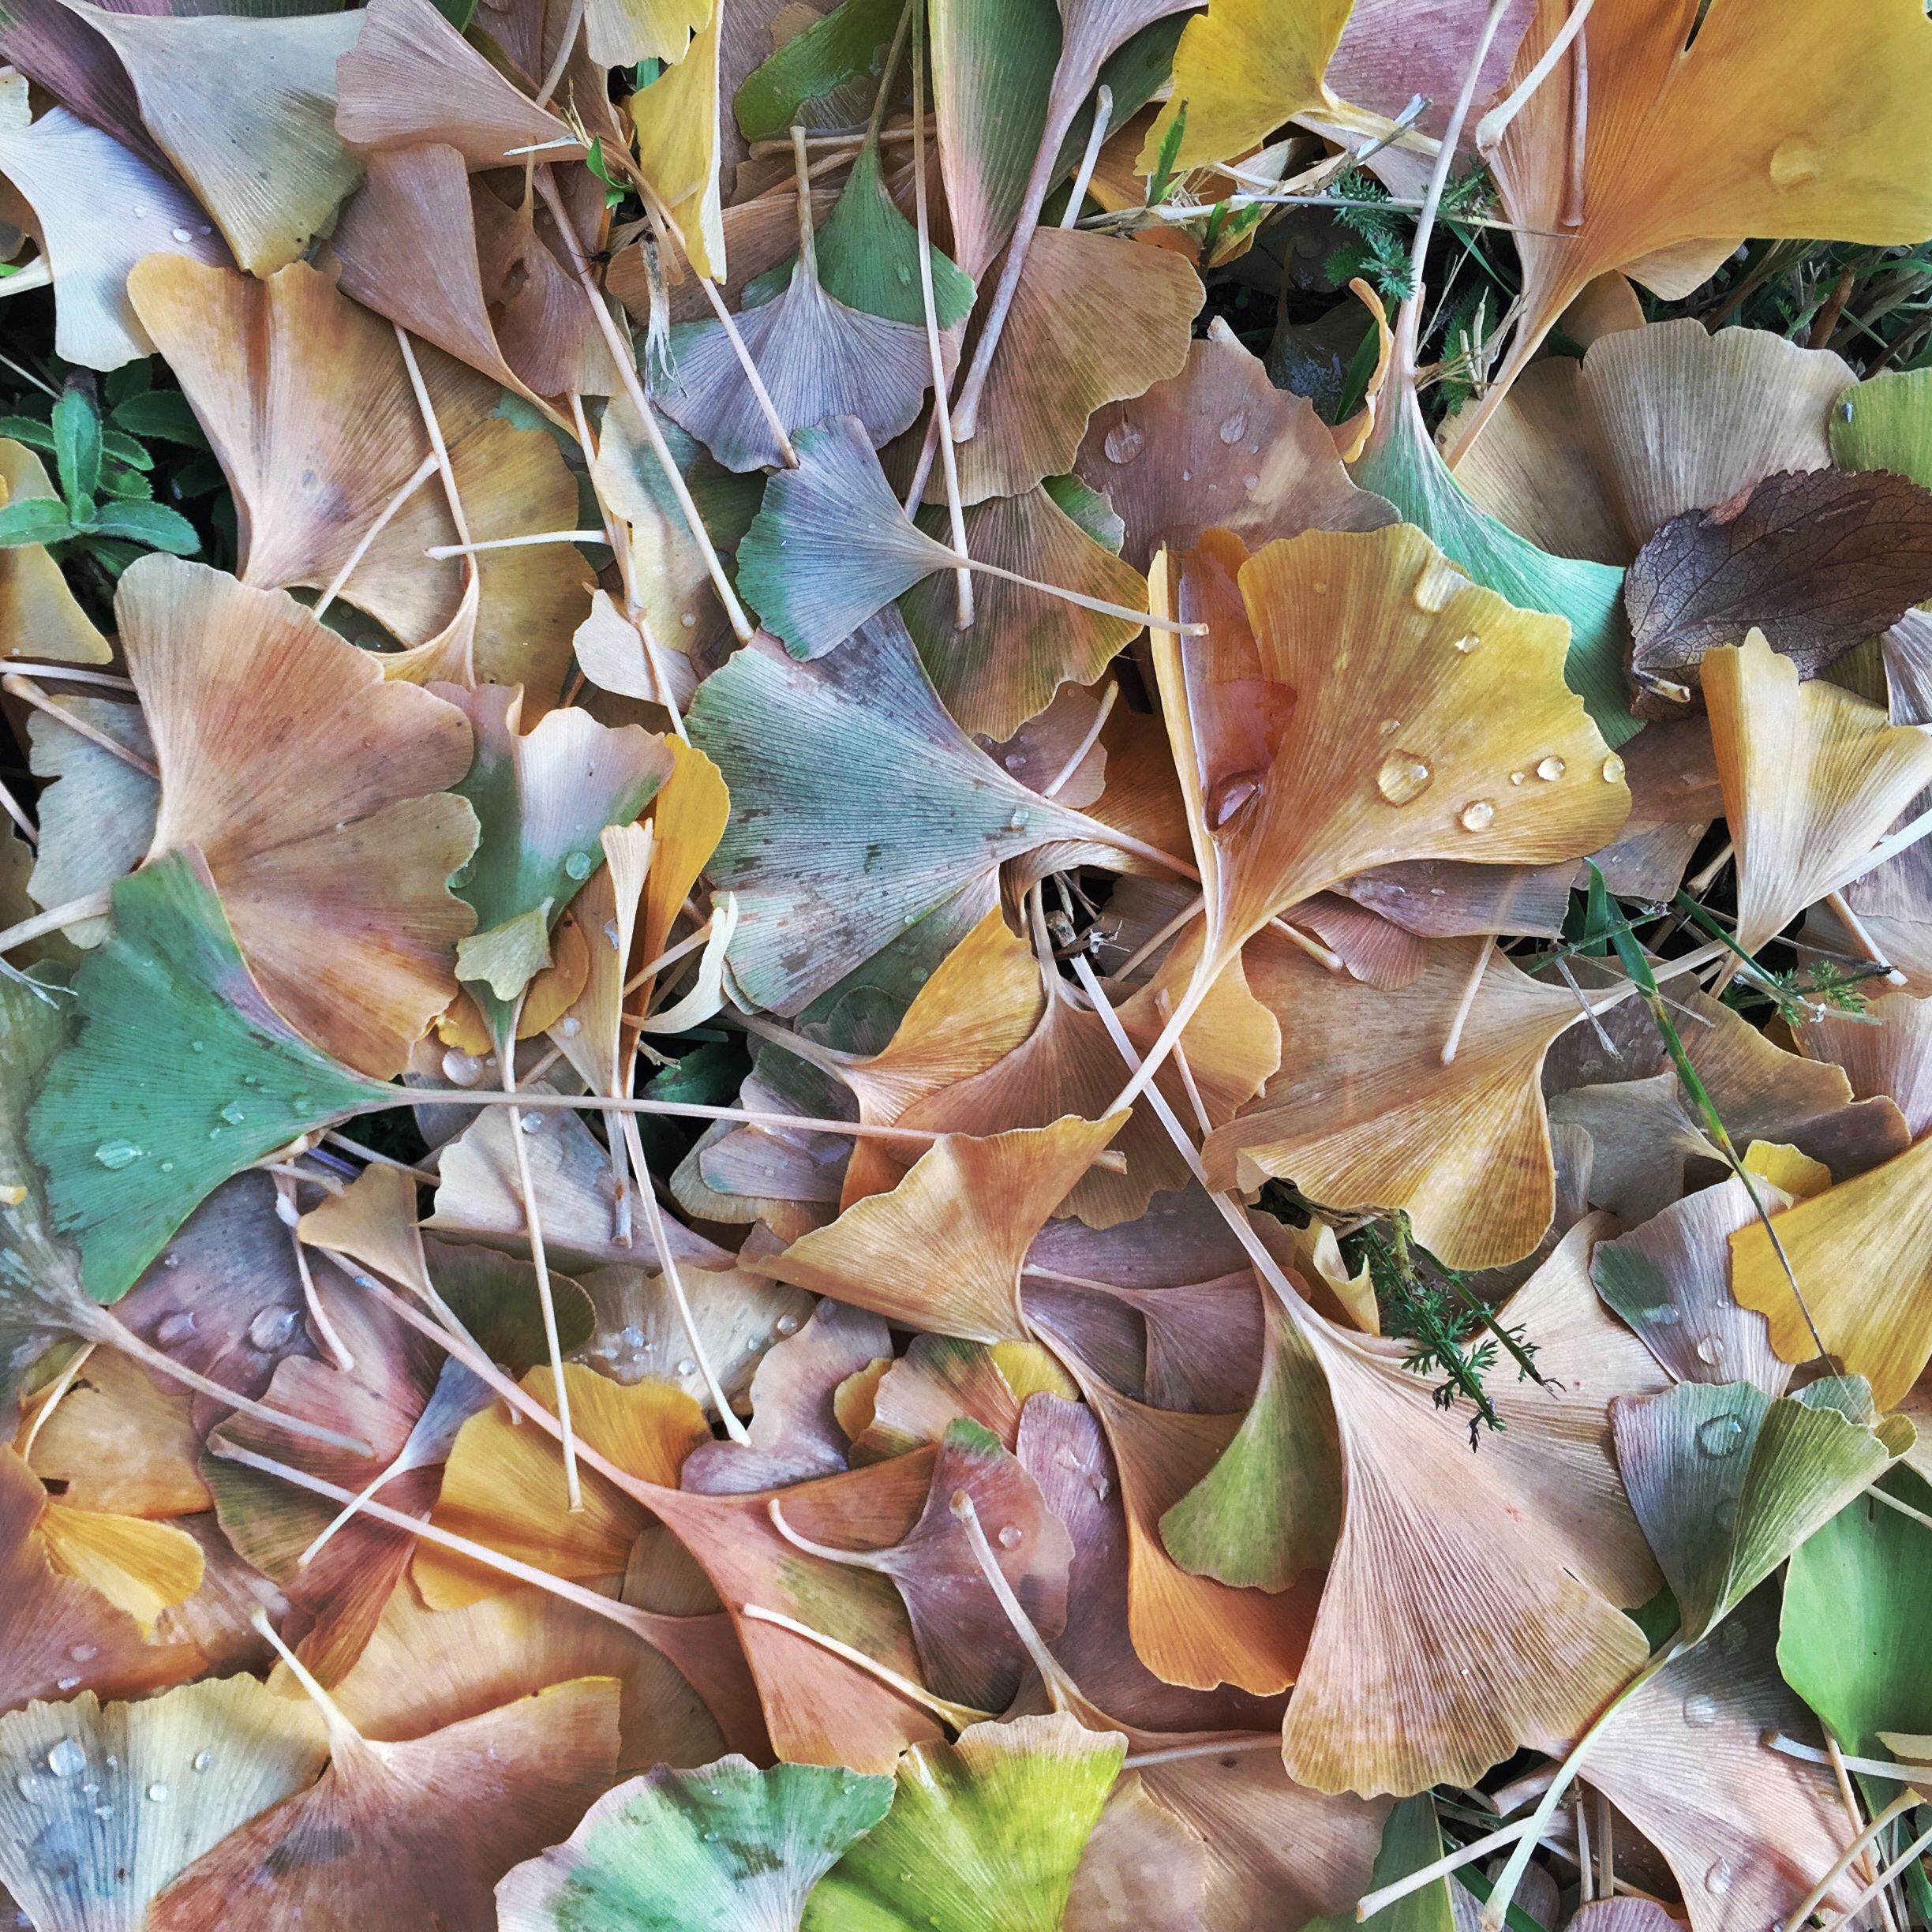 a visual depiction of small acts leading to big change, represented by a pile of fallen ginkgo leaves.